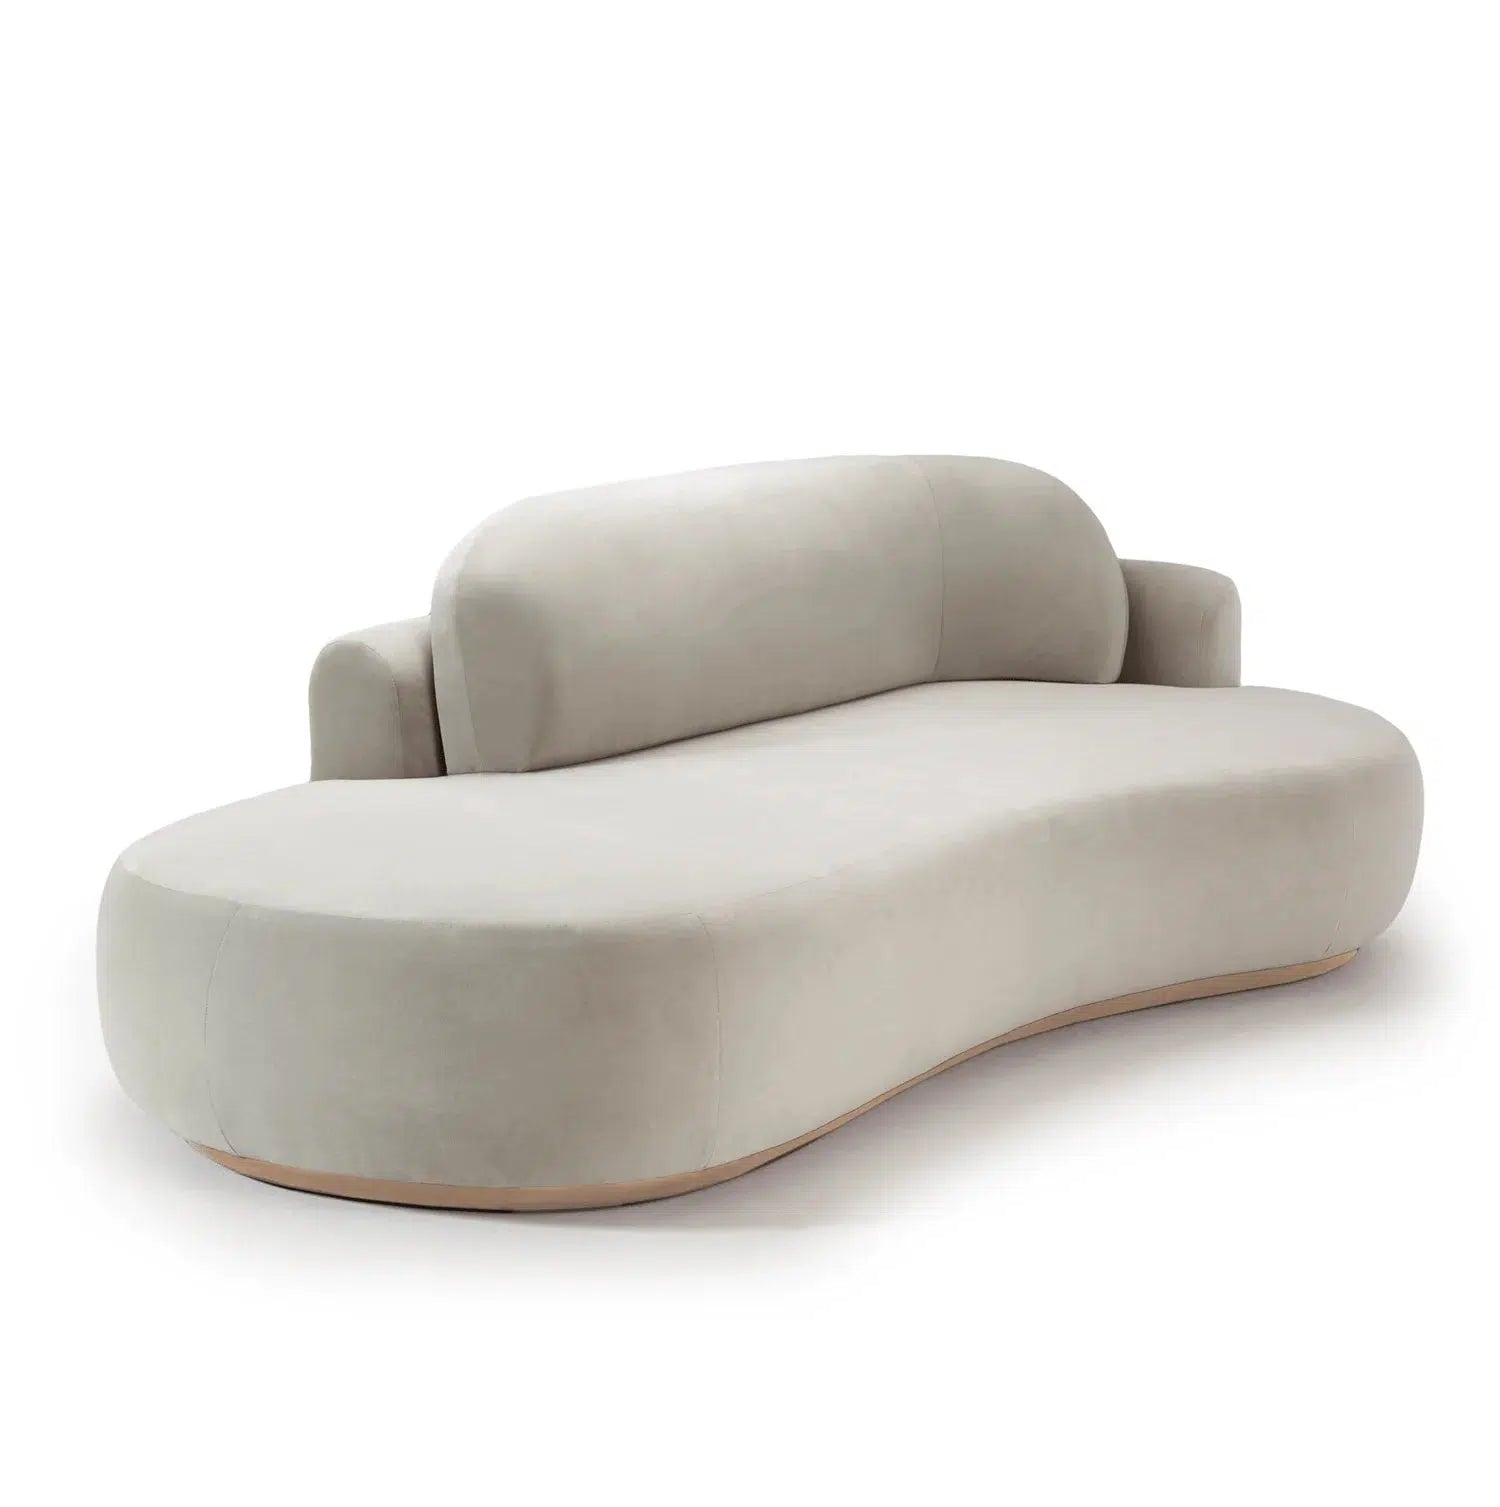 Naked Single Couch Sofa-Mambo-Contract Furniture Store